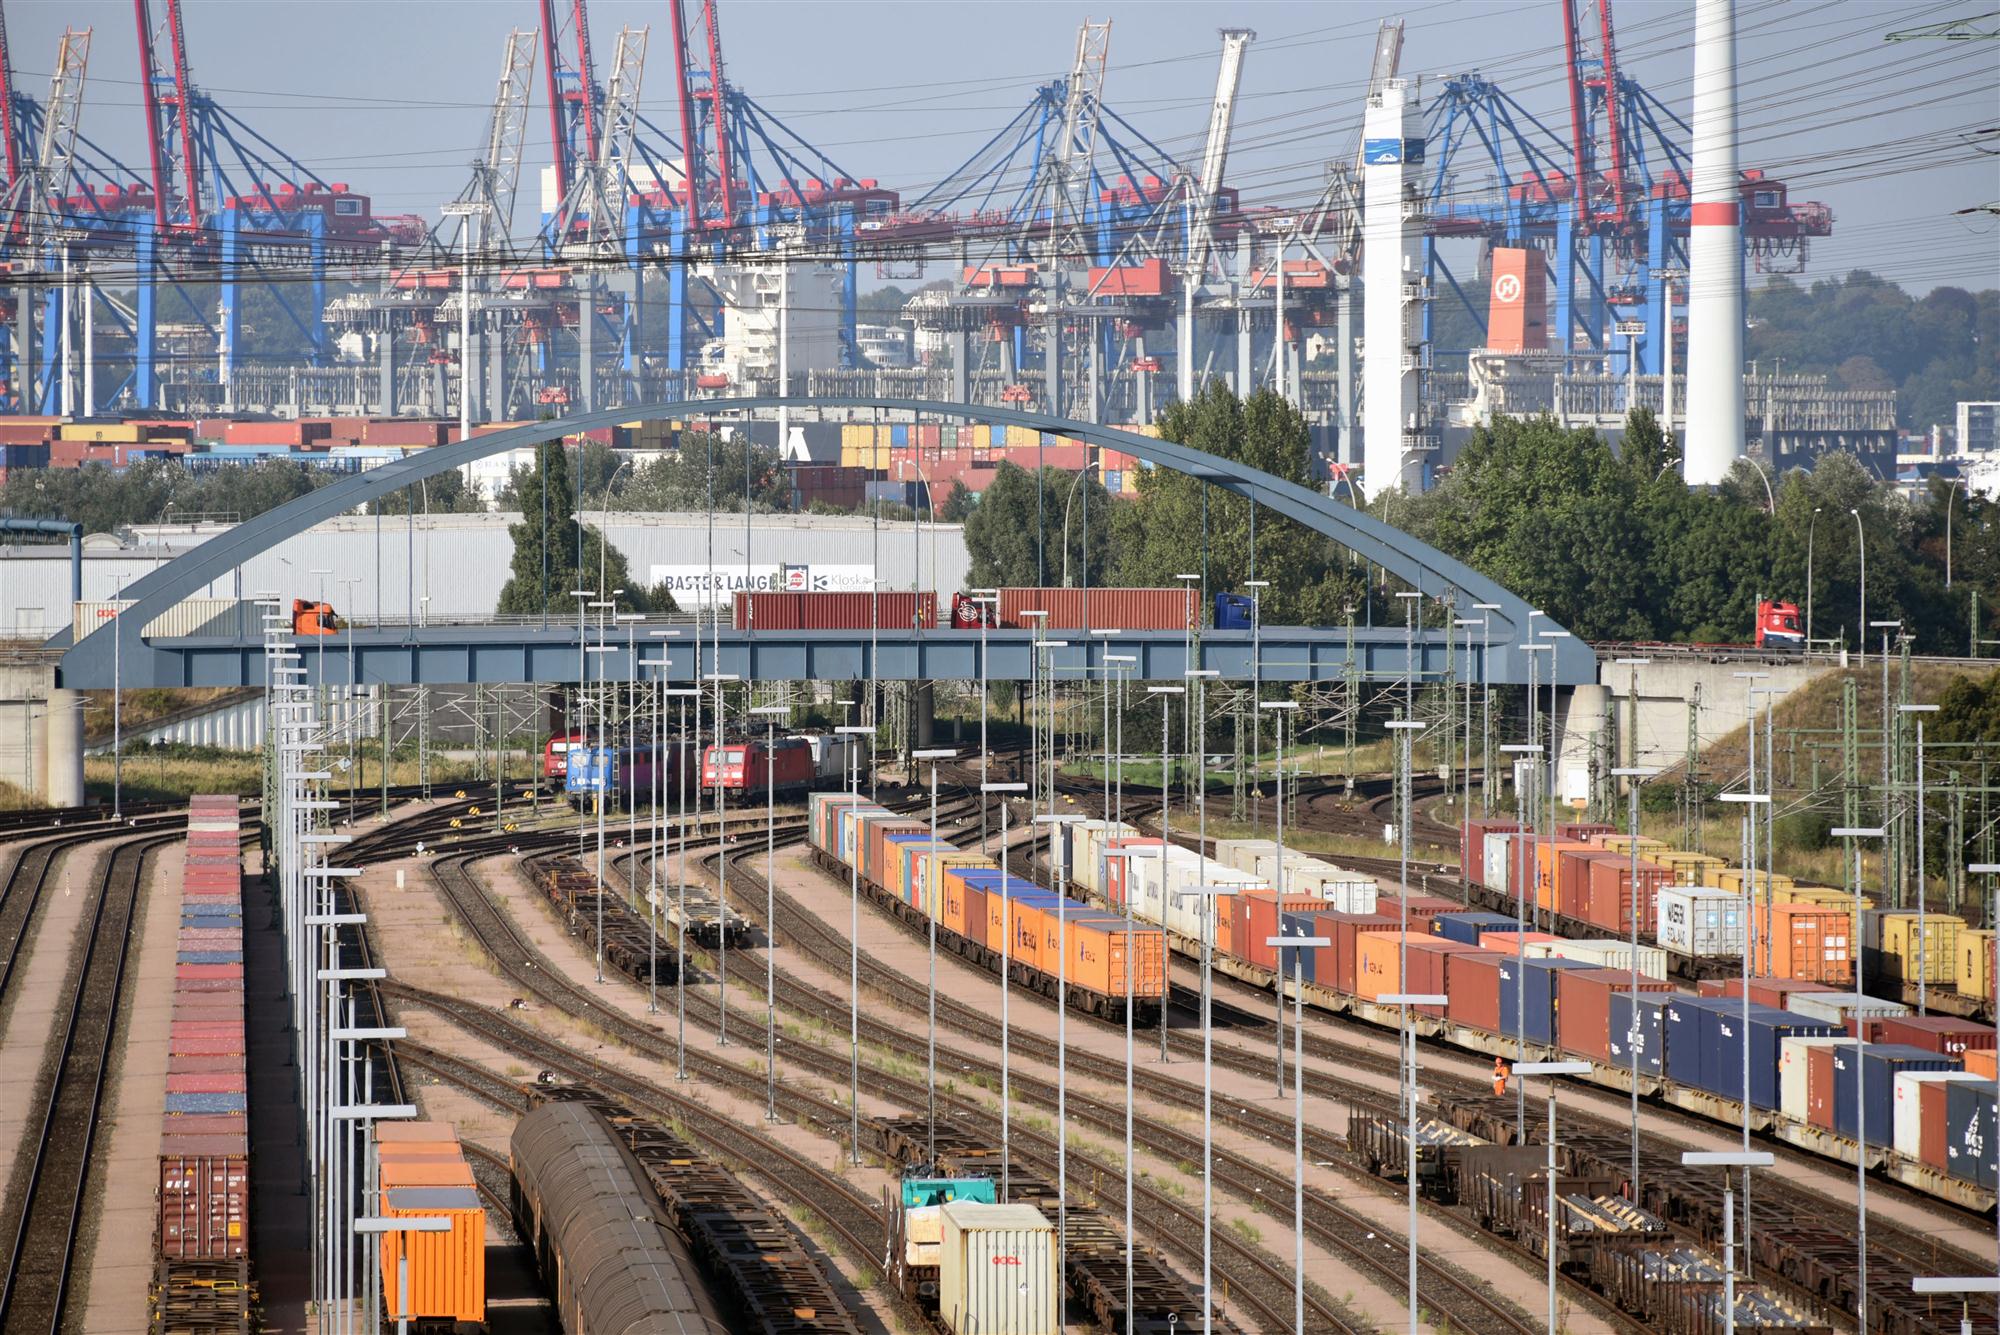 Self Photos / Files - Rail freight operations in the port of Hamburg